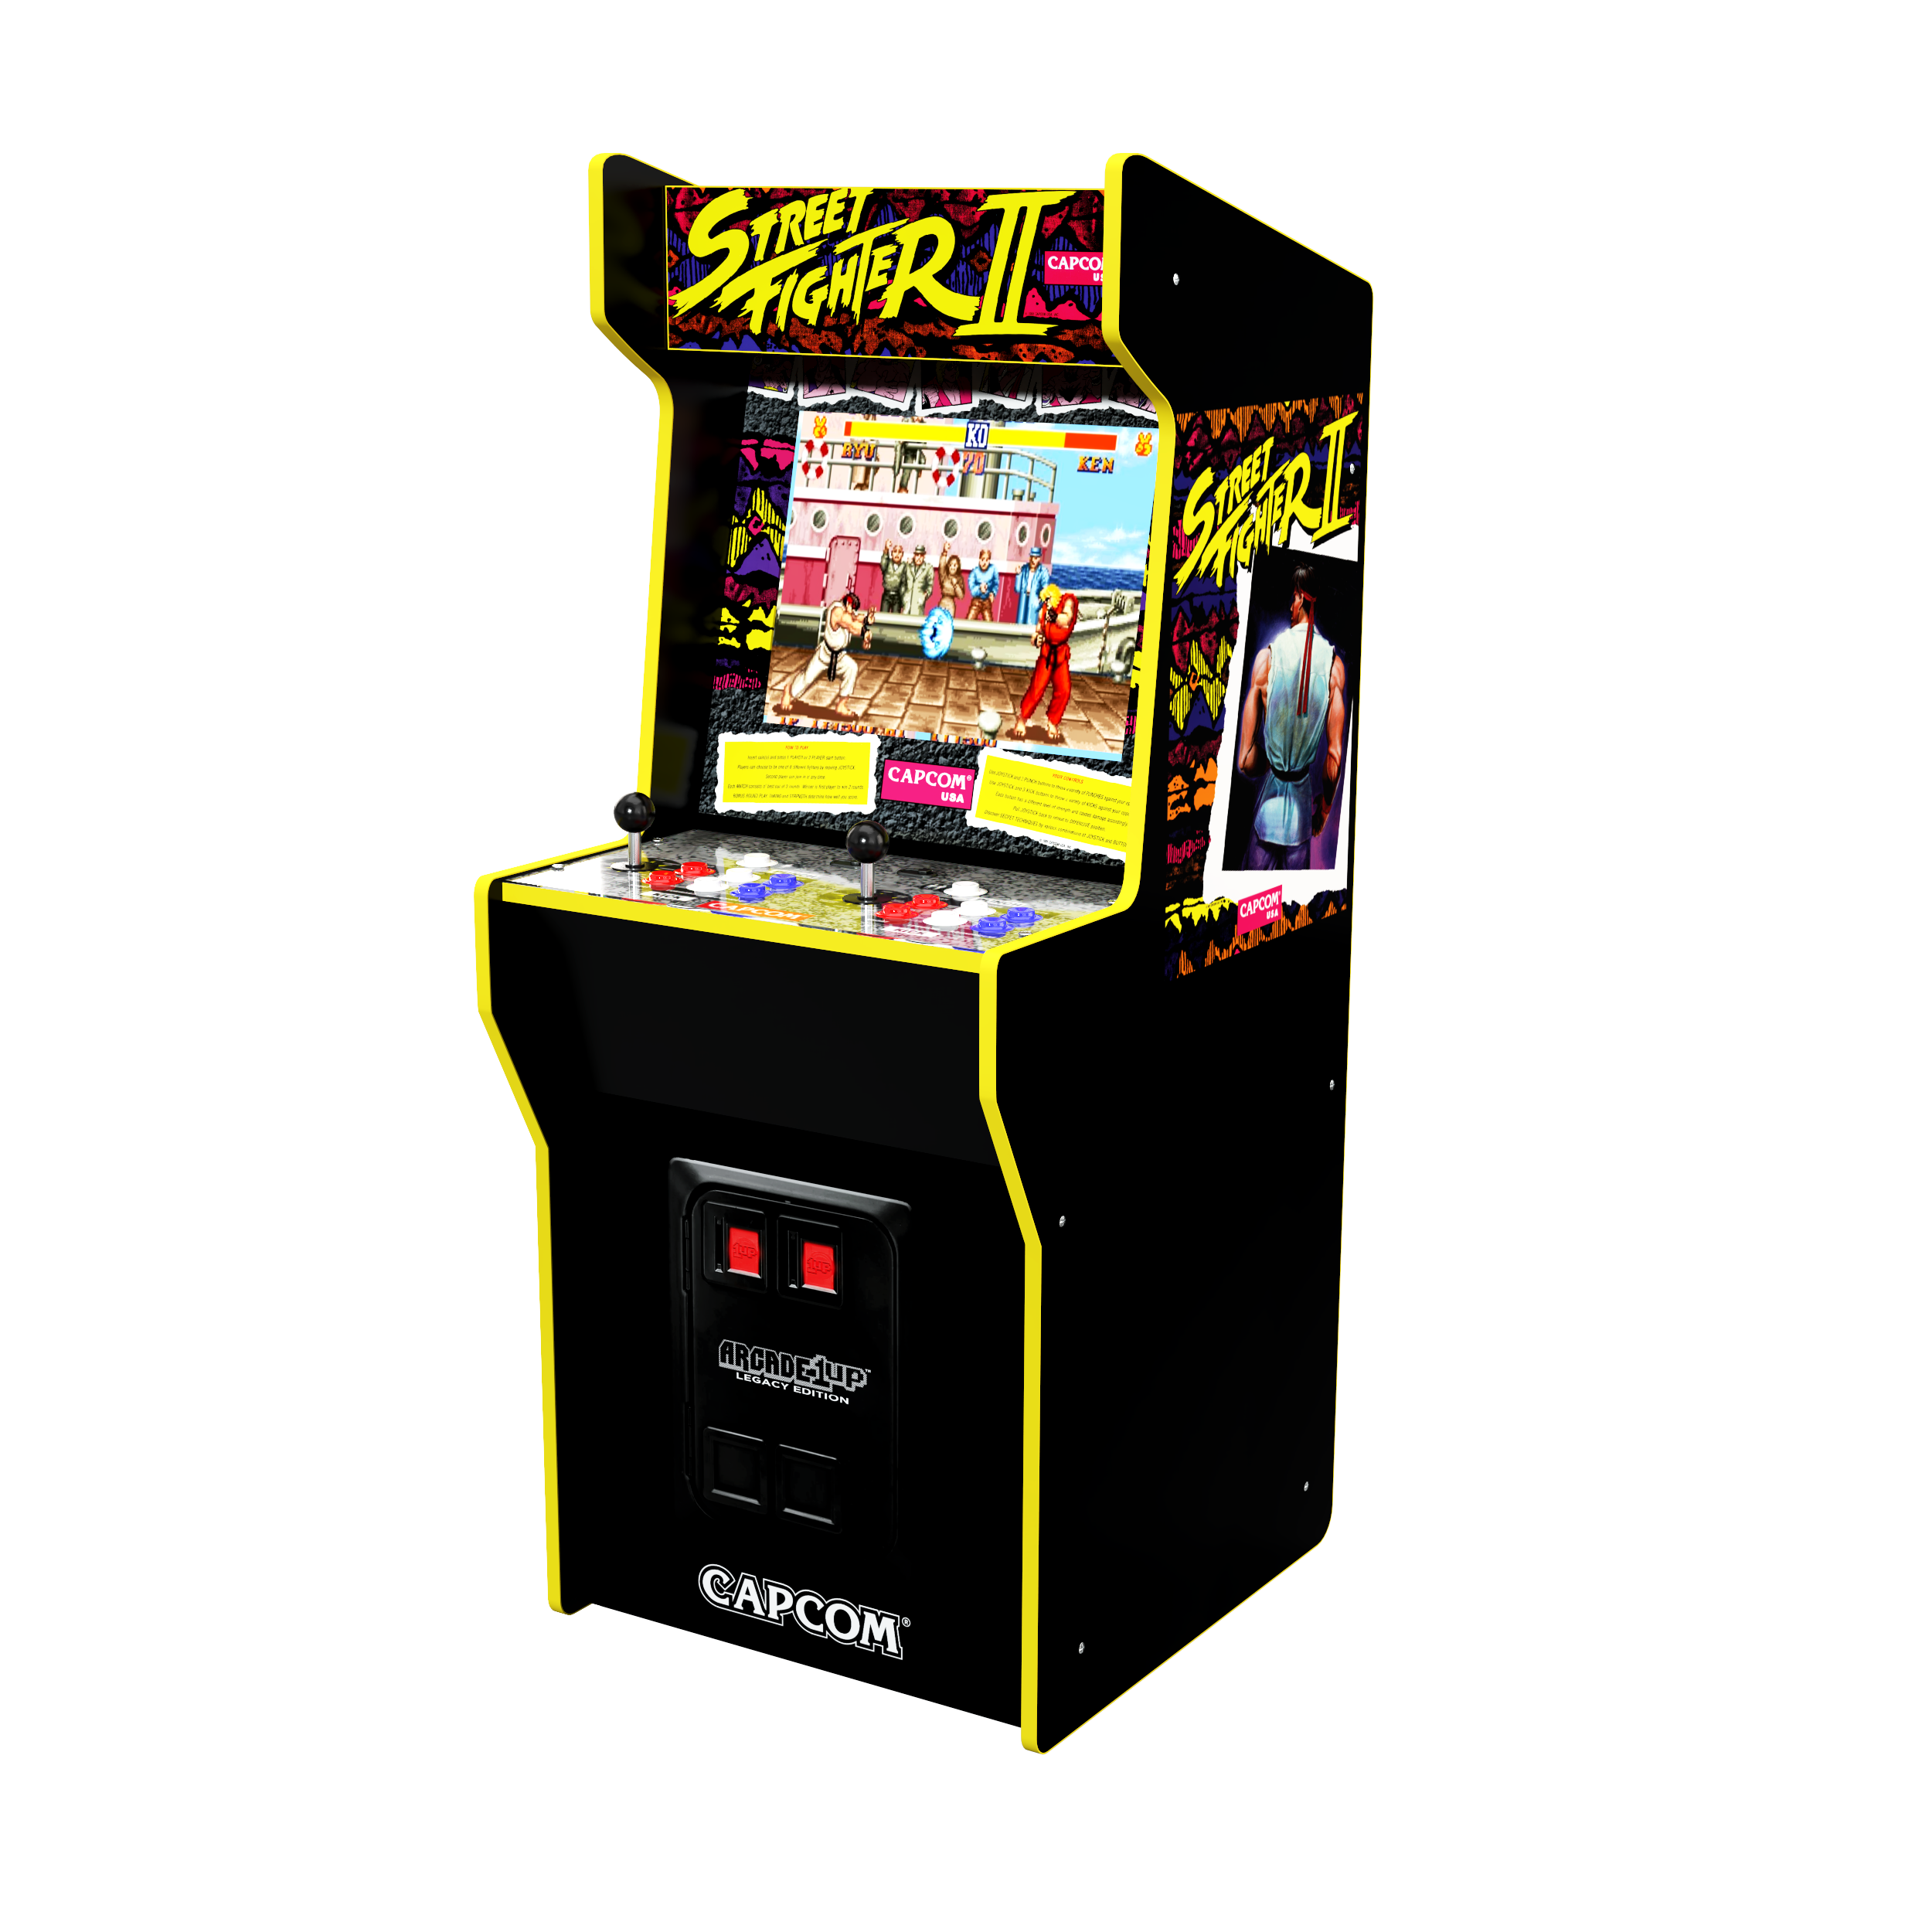 Arcade1Up, Street Fighter, 12-in-1 Capcom Legacy Arcade - image 4 of 7